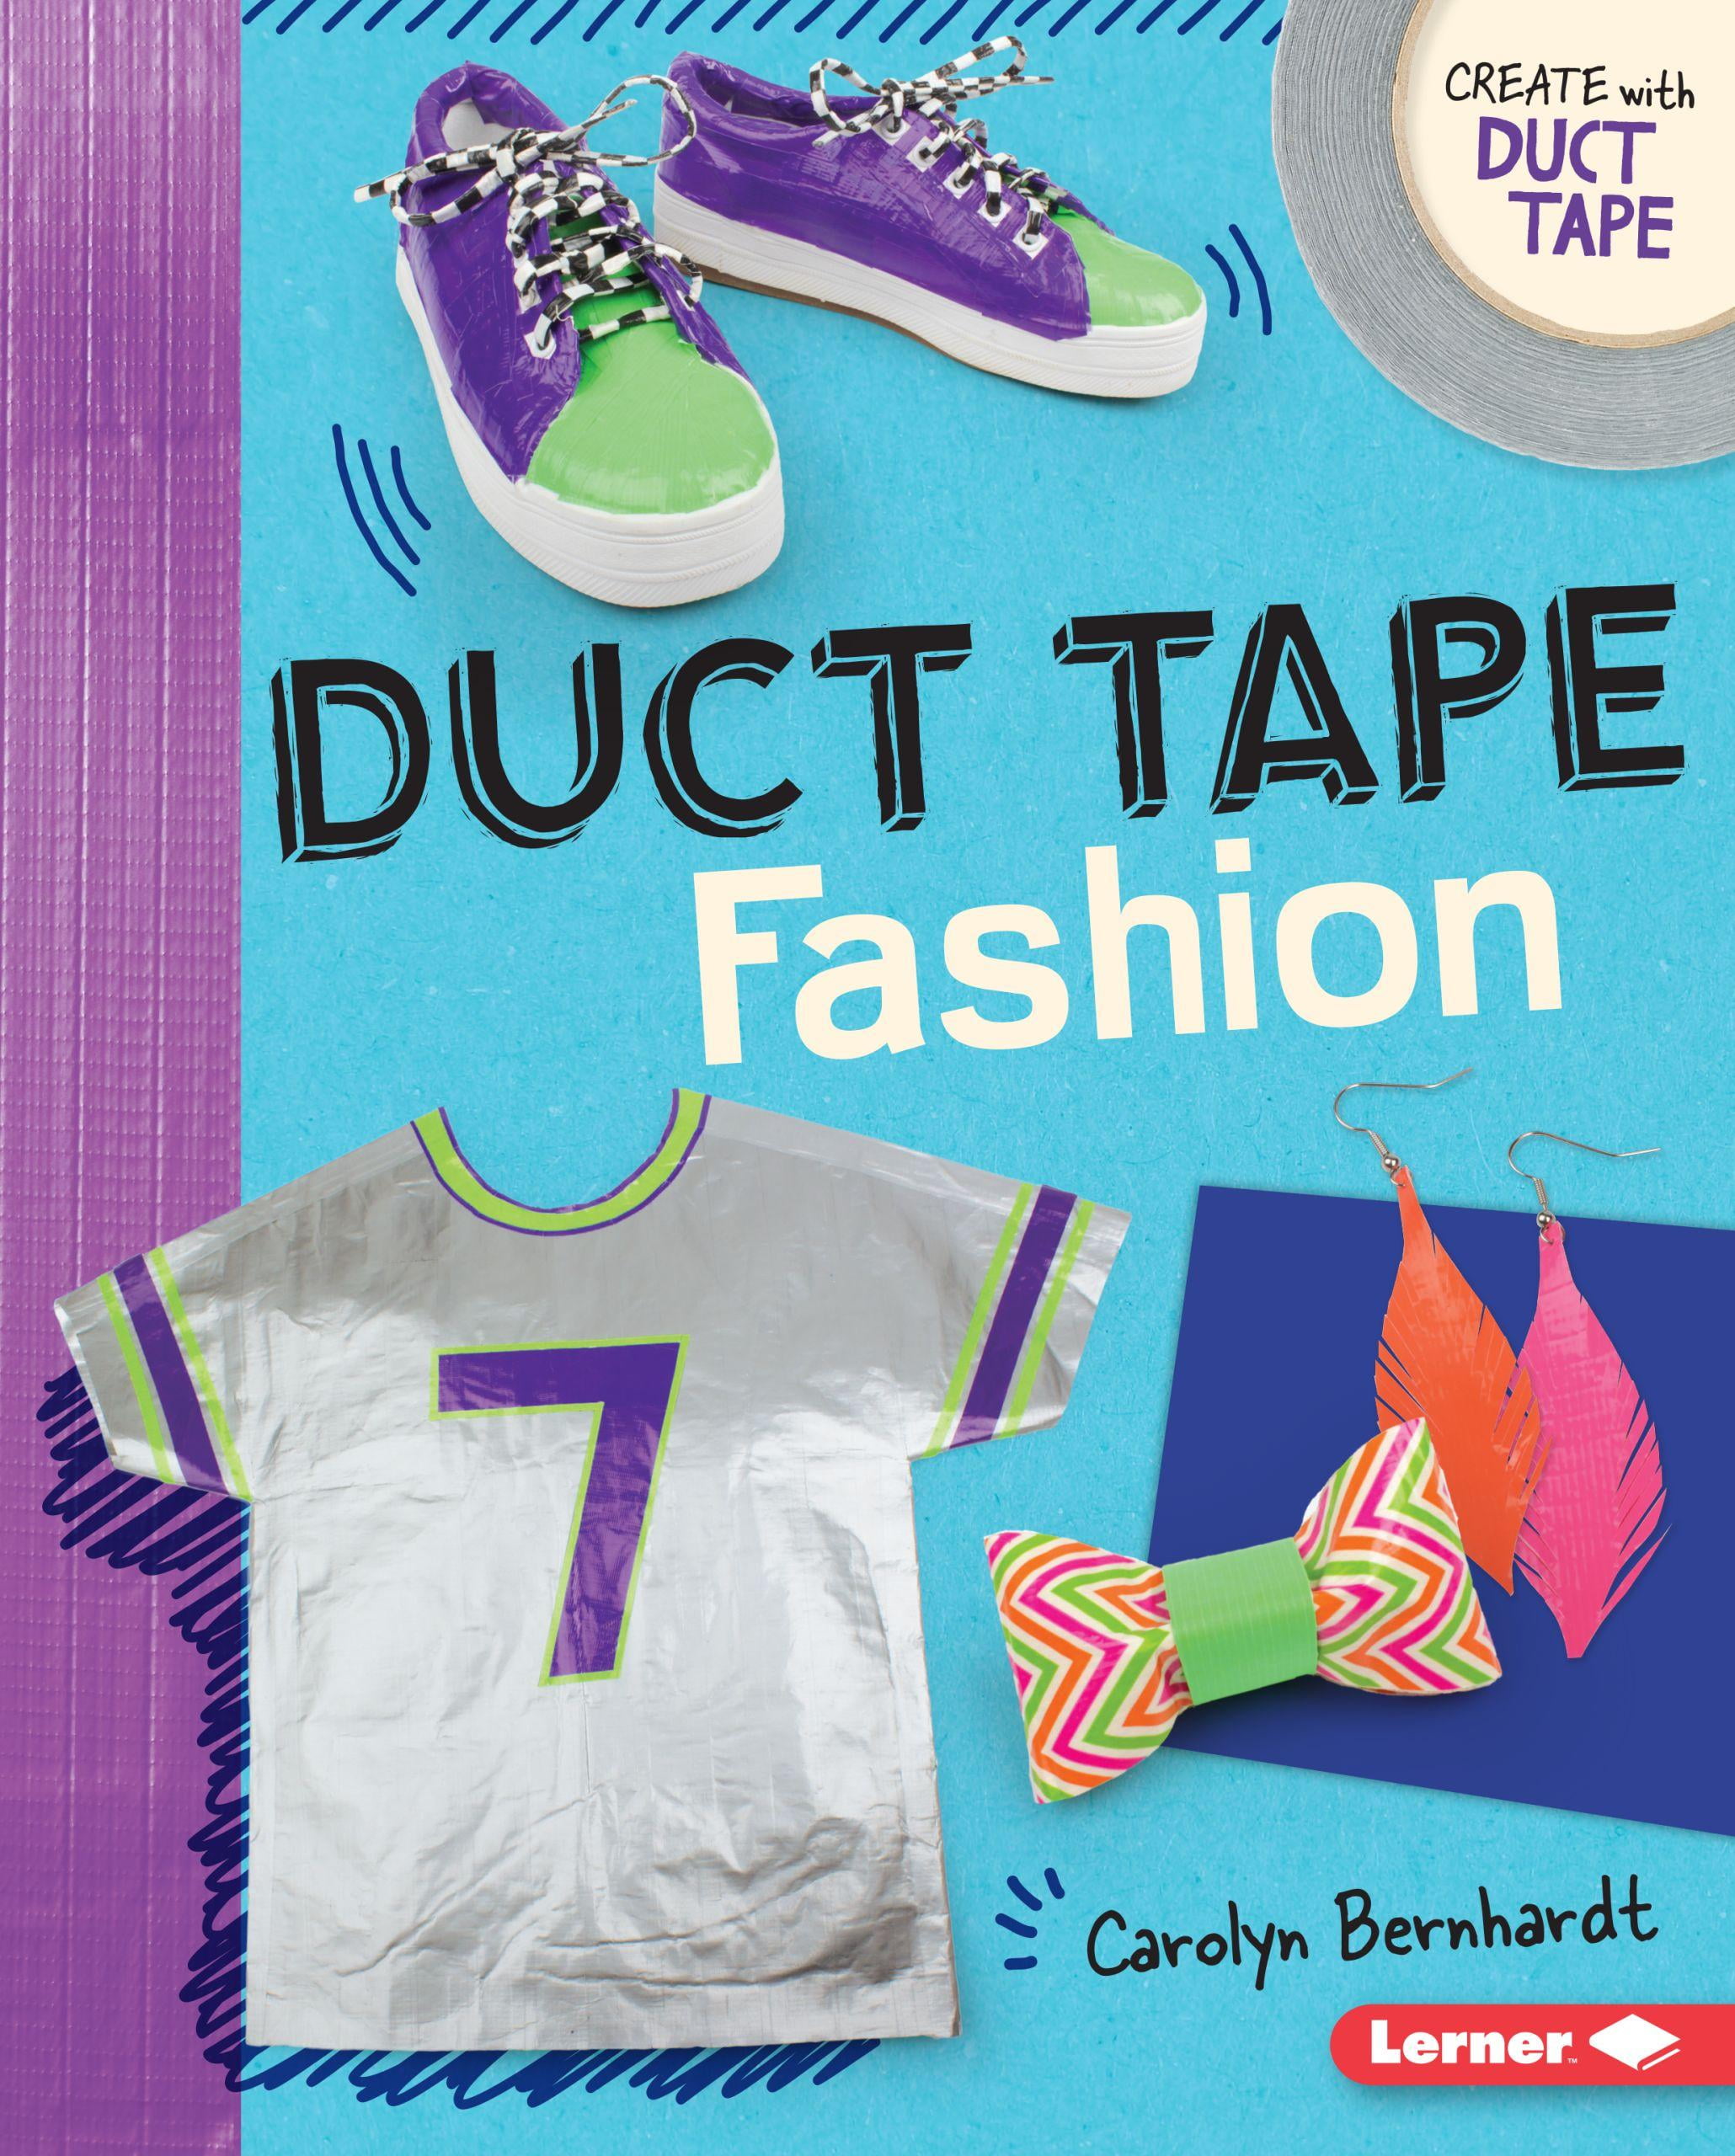 Create with Duct Tape: Duct Tape Fashion (Hardcover ...